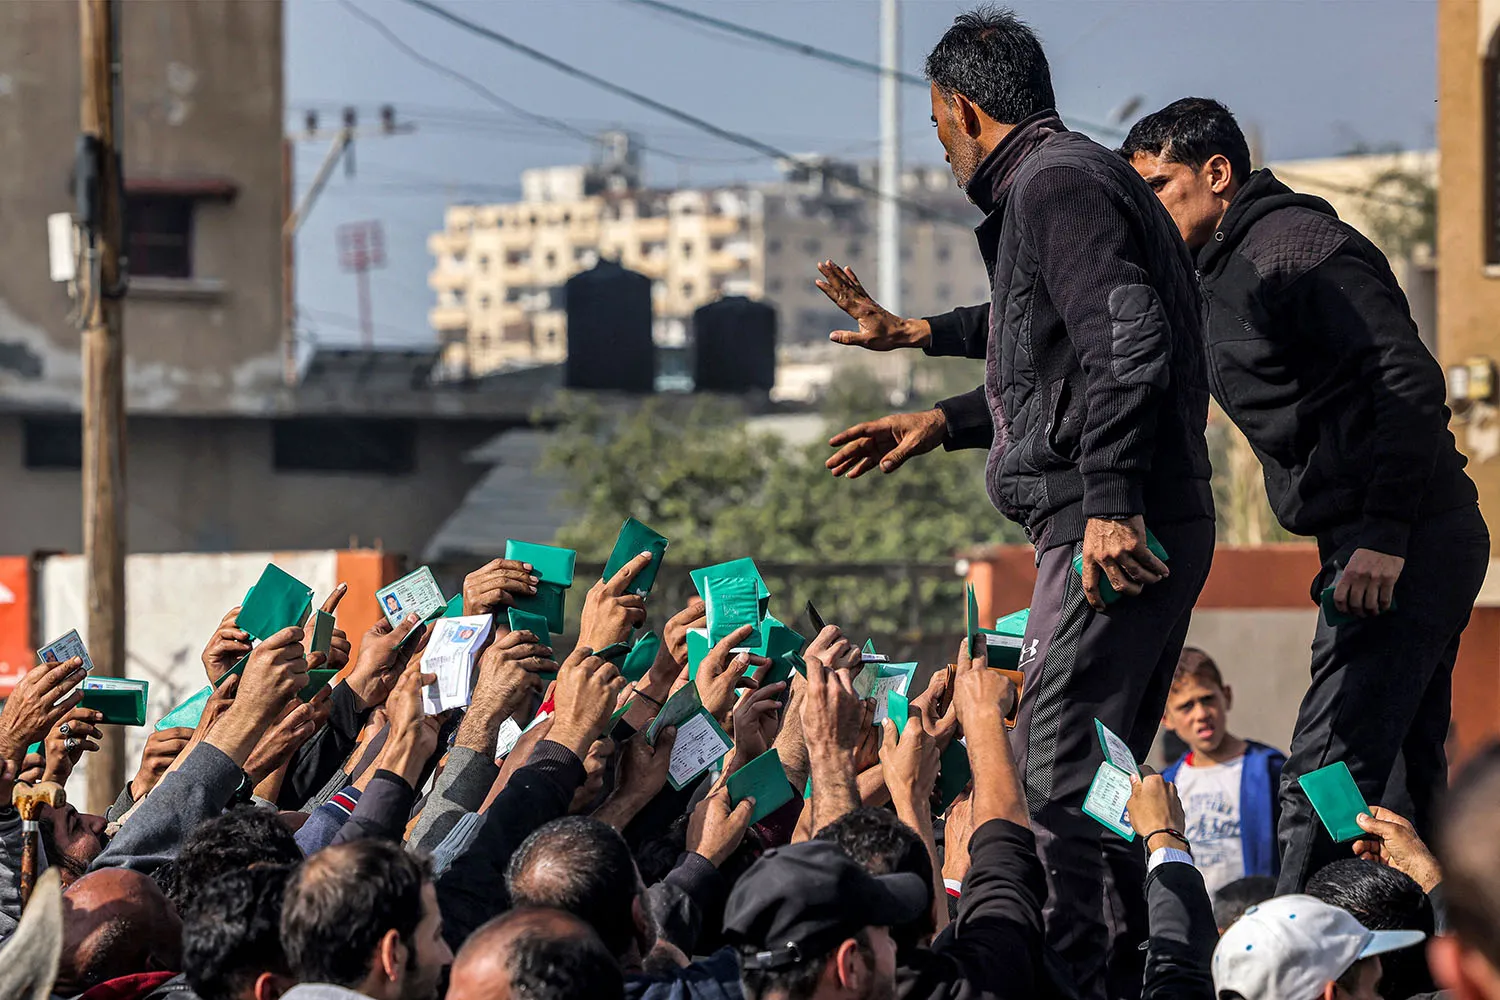 A large group of Palestinians wave identity cards as they gather to receive rations.